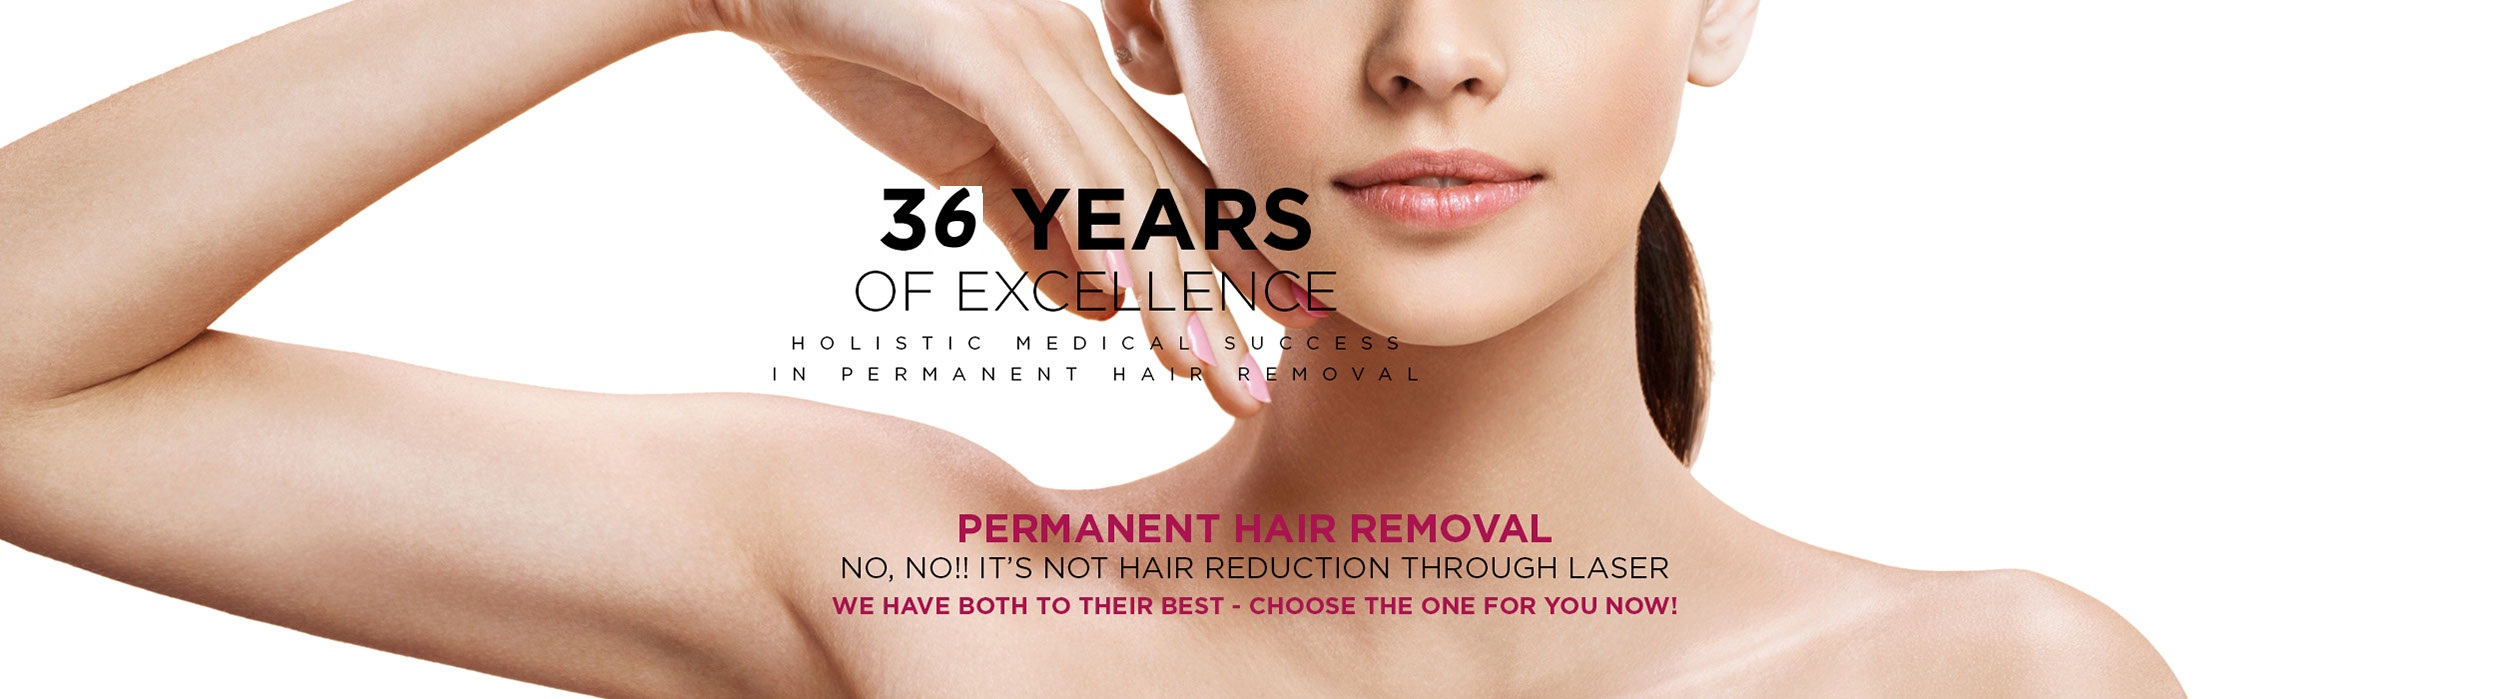 What is the duration of the holistic permanent hair removal treatment?